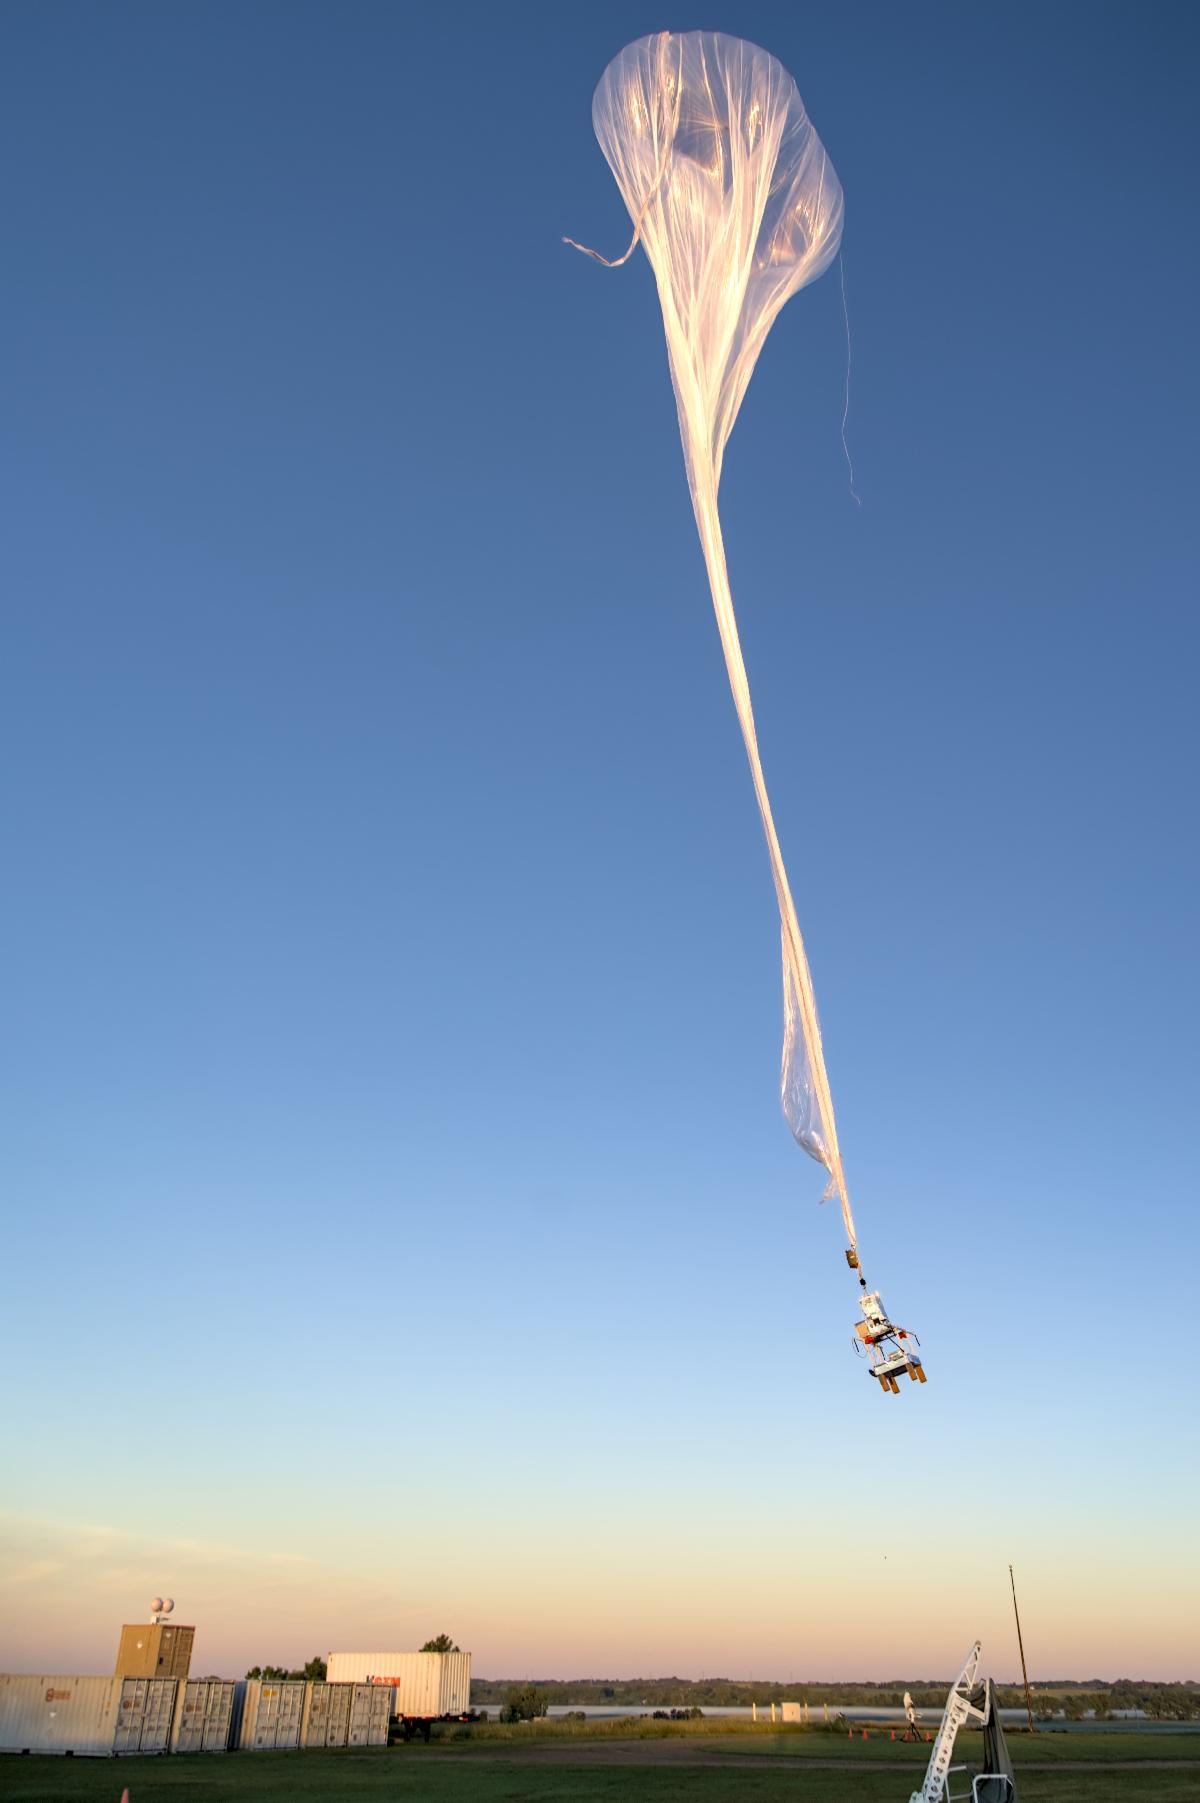 Aerostar's Zero-Pressure Balloon System launches from Baltic (SD) carrying a TechLeap Prize winning payload from Orion Labs in its gondola. (Credit: Orion Labs/Margarita Reyes)